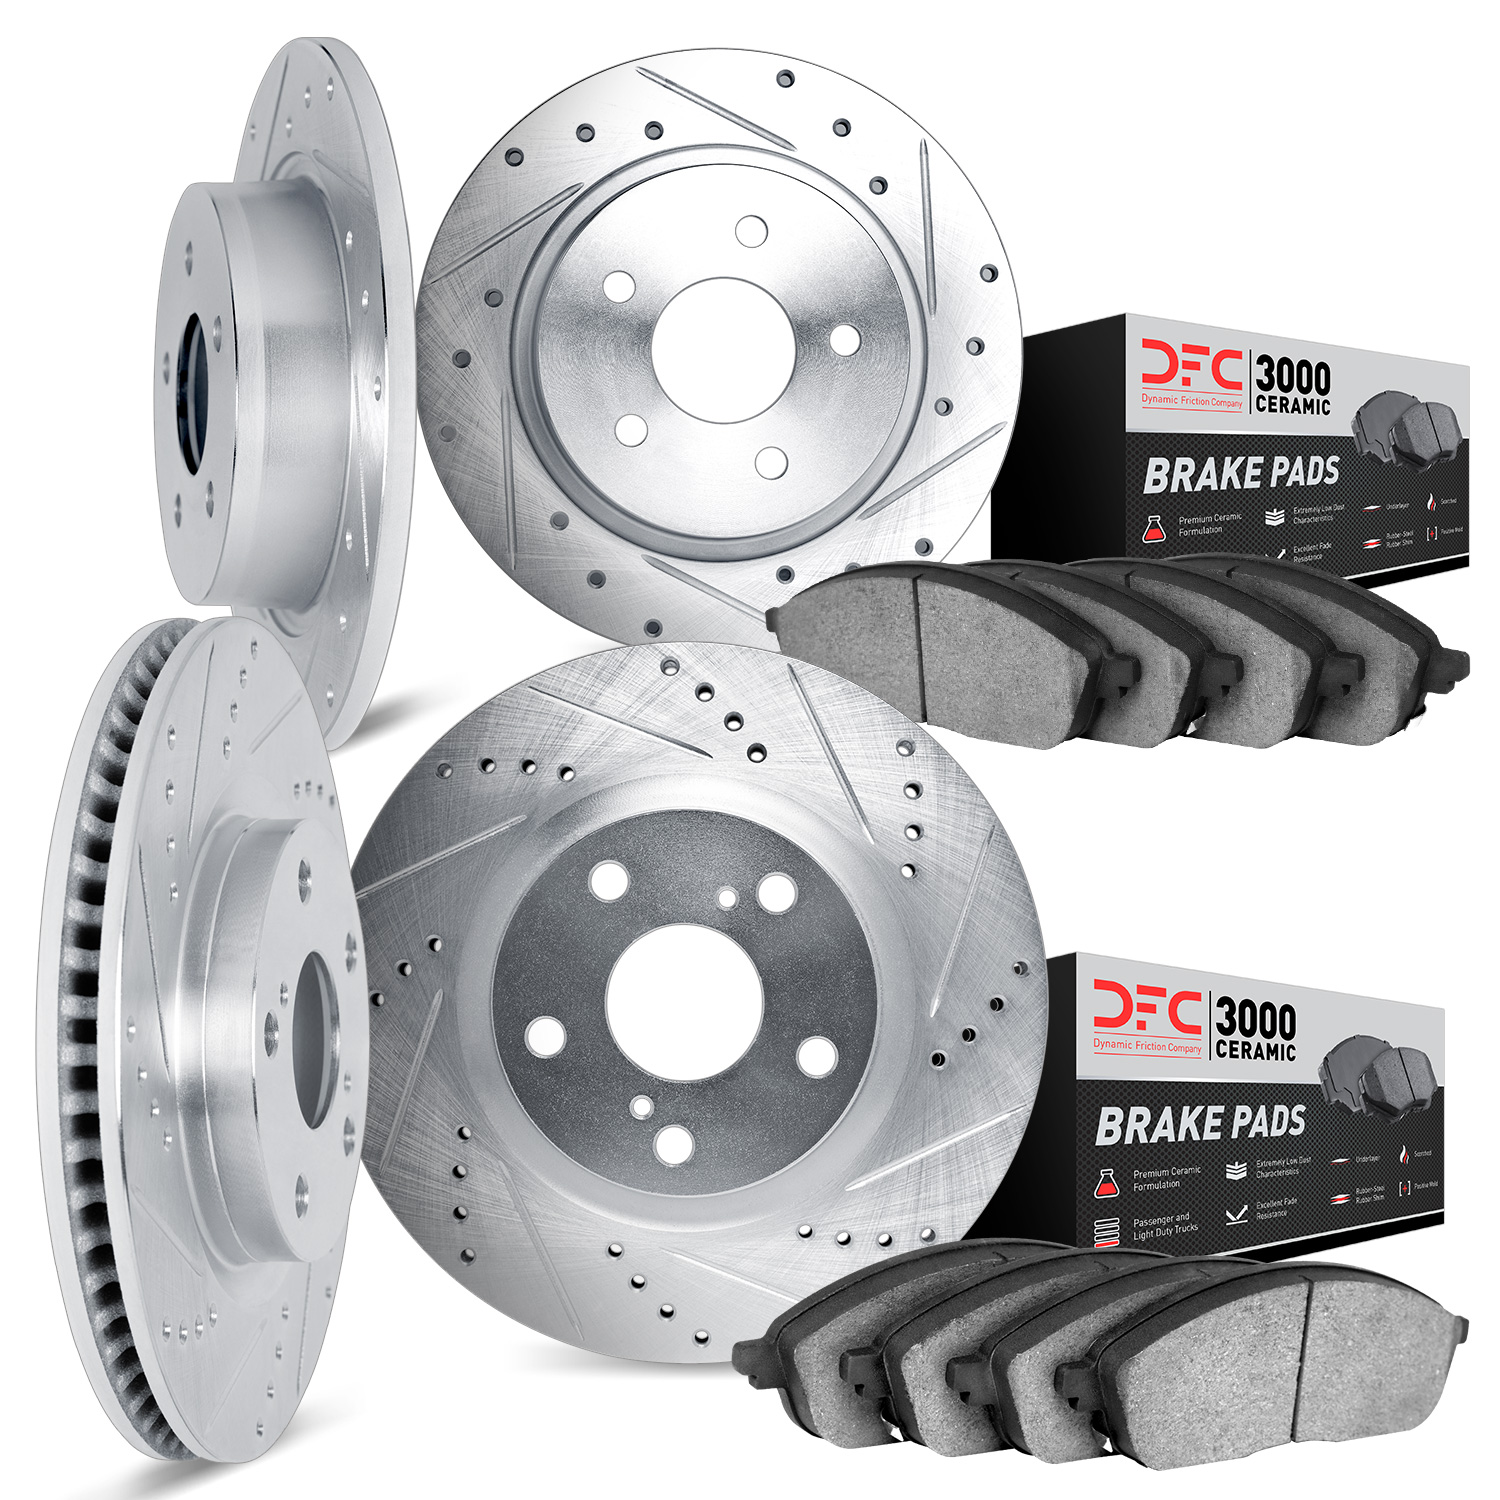 7304-56016 Drilled/Slotted Brake Rotor with 3000-Series Ceramic Brake Pads Kit [Silver], 1998-2002 Ford/Lincoln/Mercury/Mazda, P